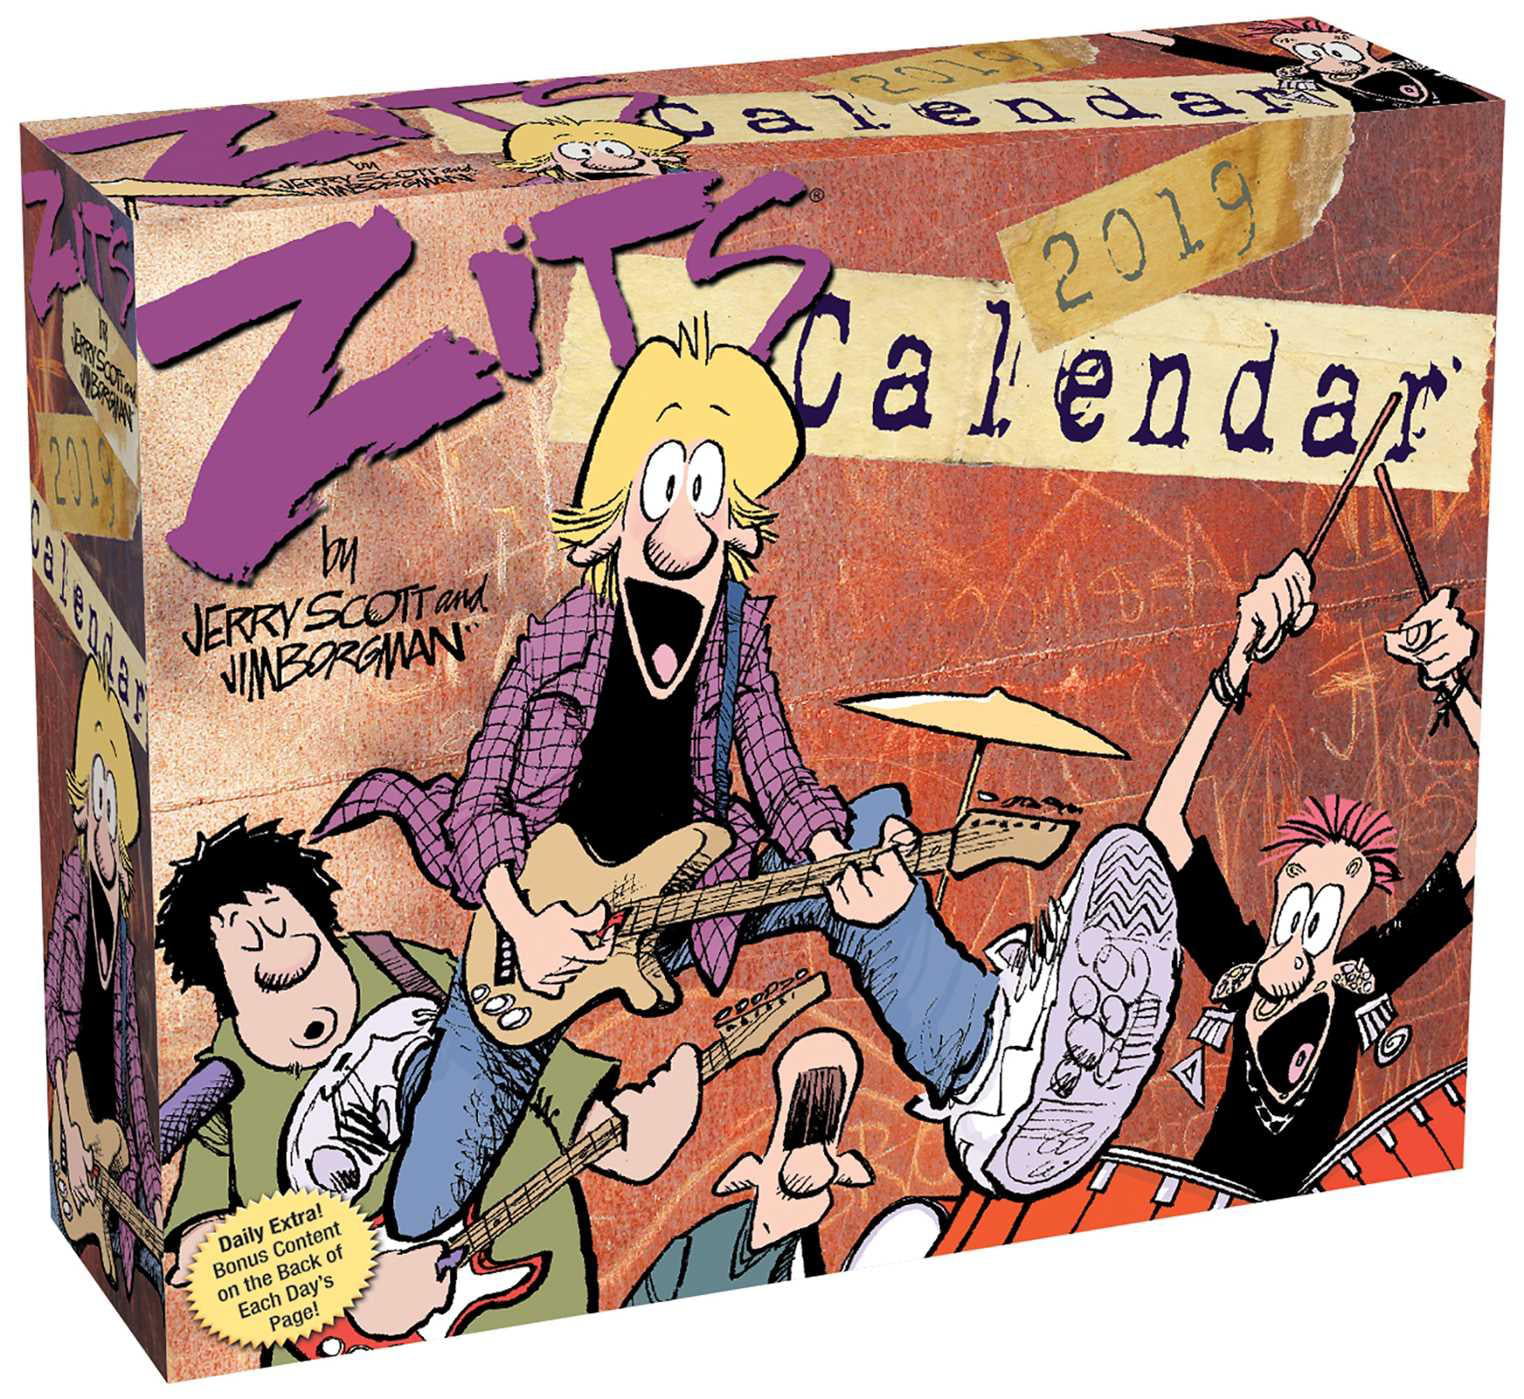 zits-2019-day-to-day-calendar-other-walmart